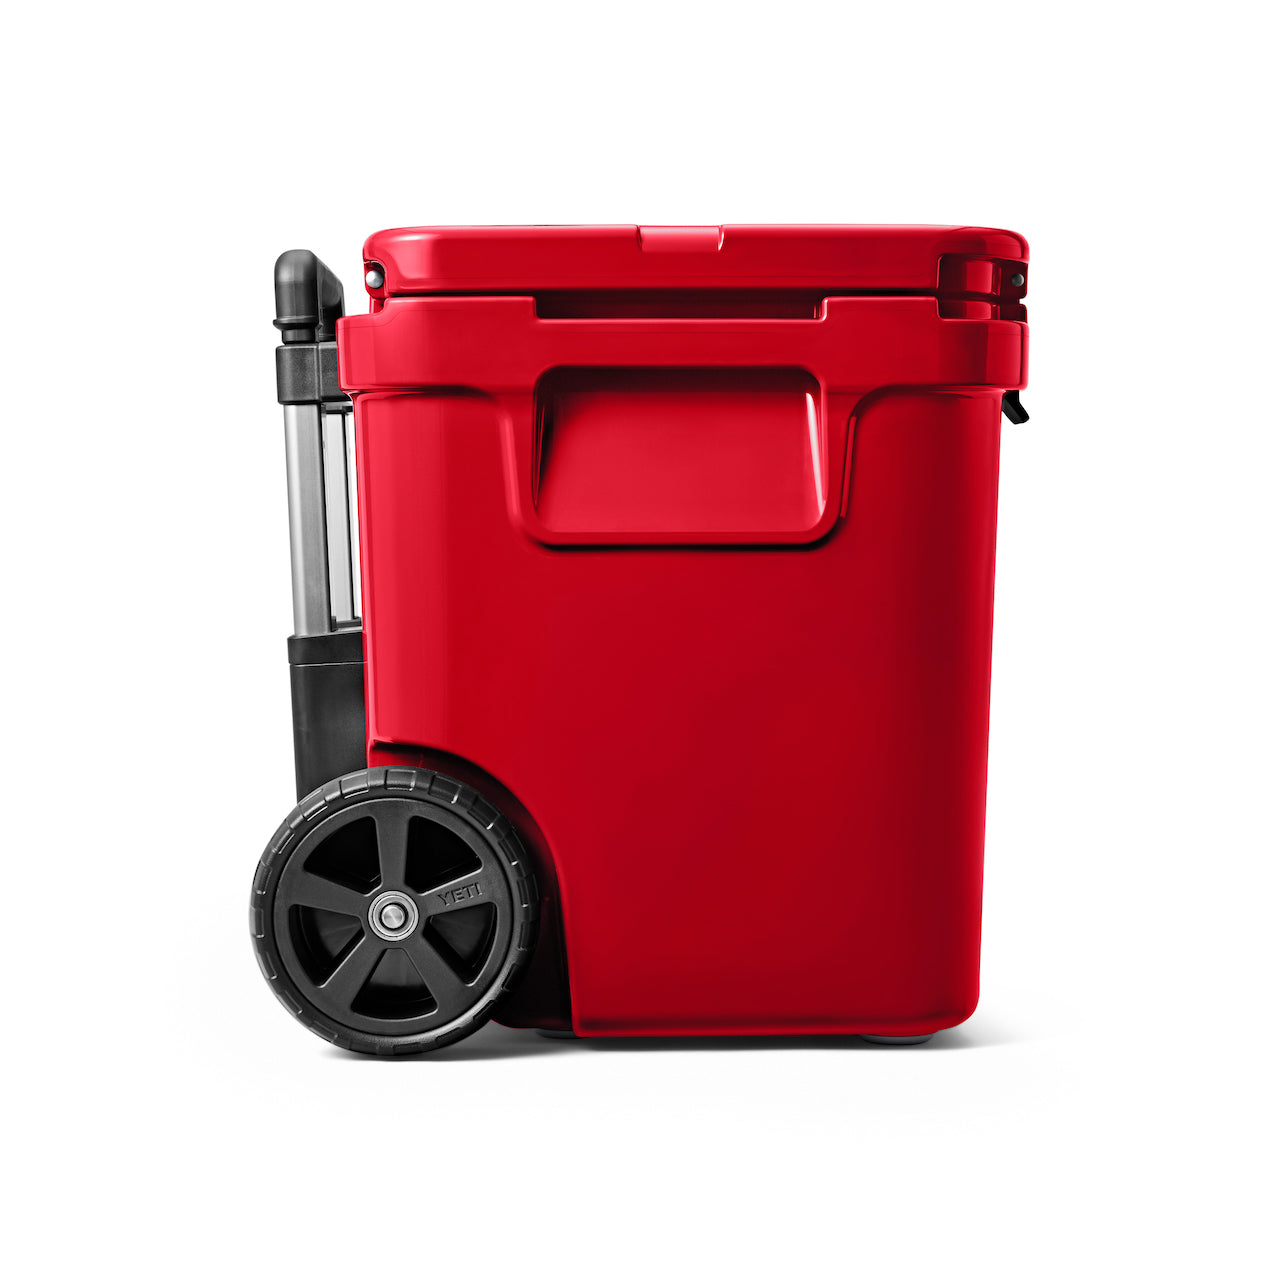 YETI Roadie 48 Wheeled Cool Box in rescue red side